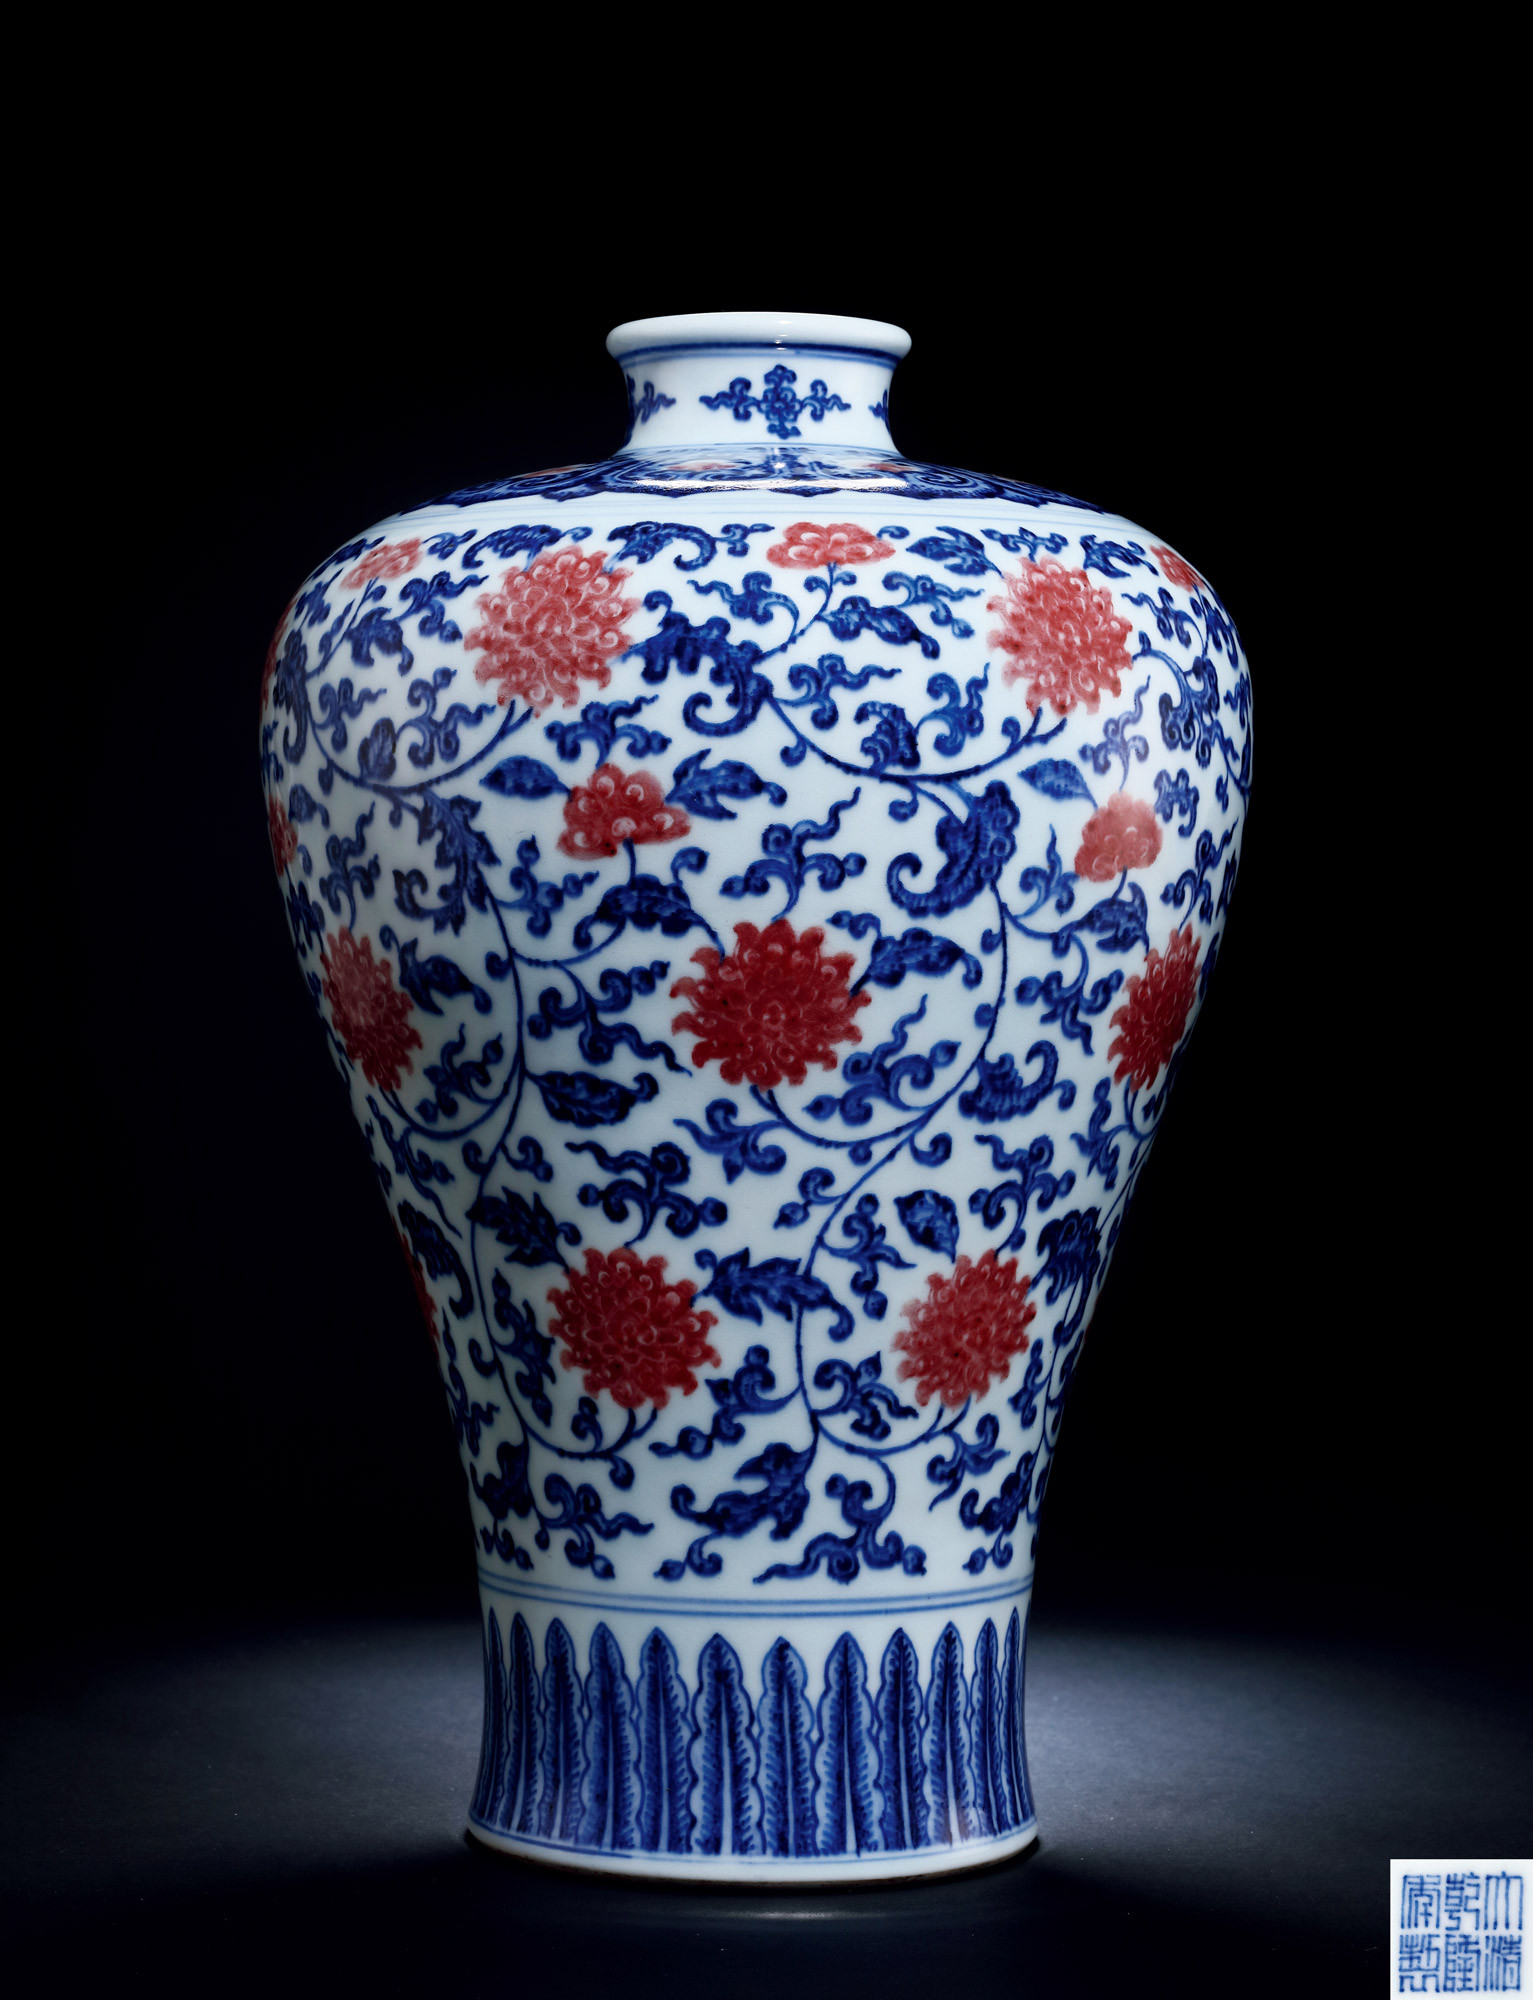 AN EXTREMELY RARE AND IMPORTANT BLUE AND WHITE WITH COPPER-RED ‘SCROLLING FLORAL’VASE, MEIPING